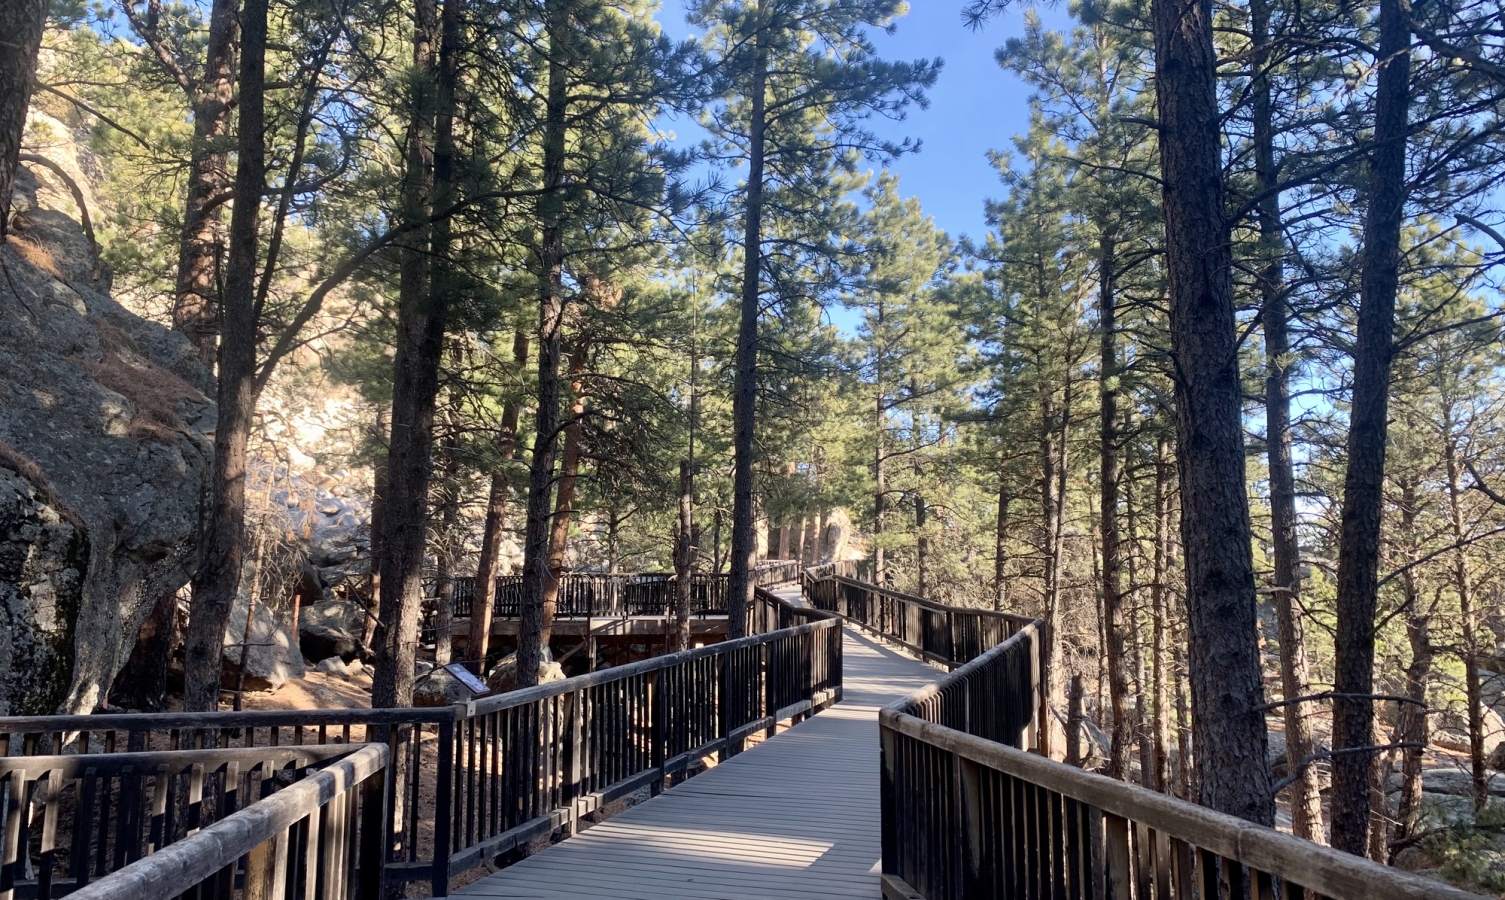 Wooden boardwalk with railings at the Presidential Trail at Mount Rushmore in South Dakota